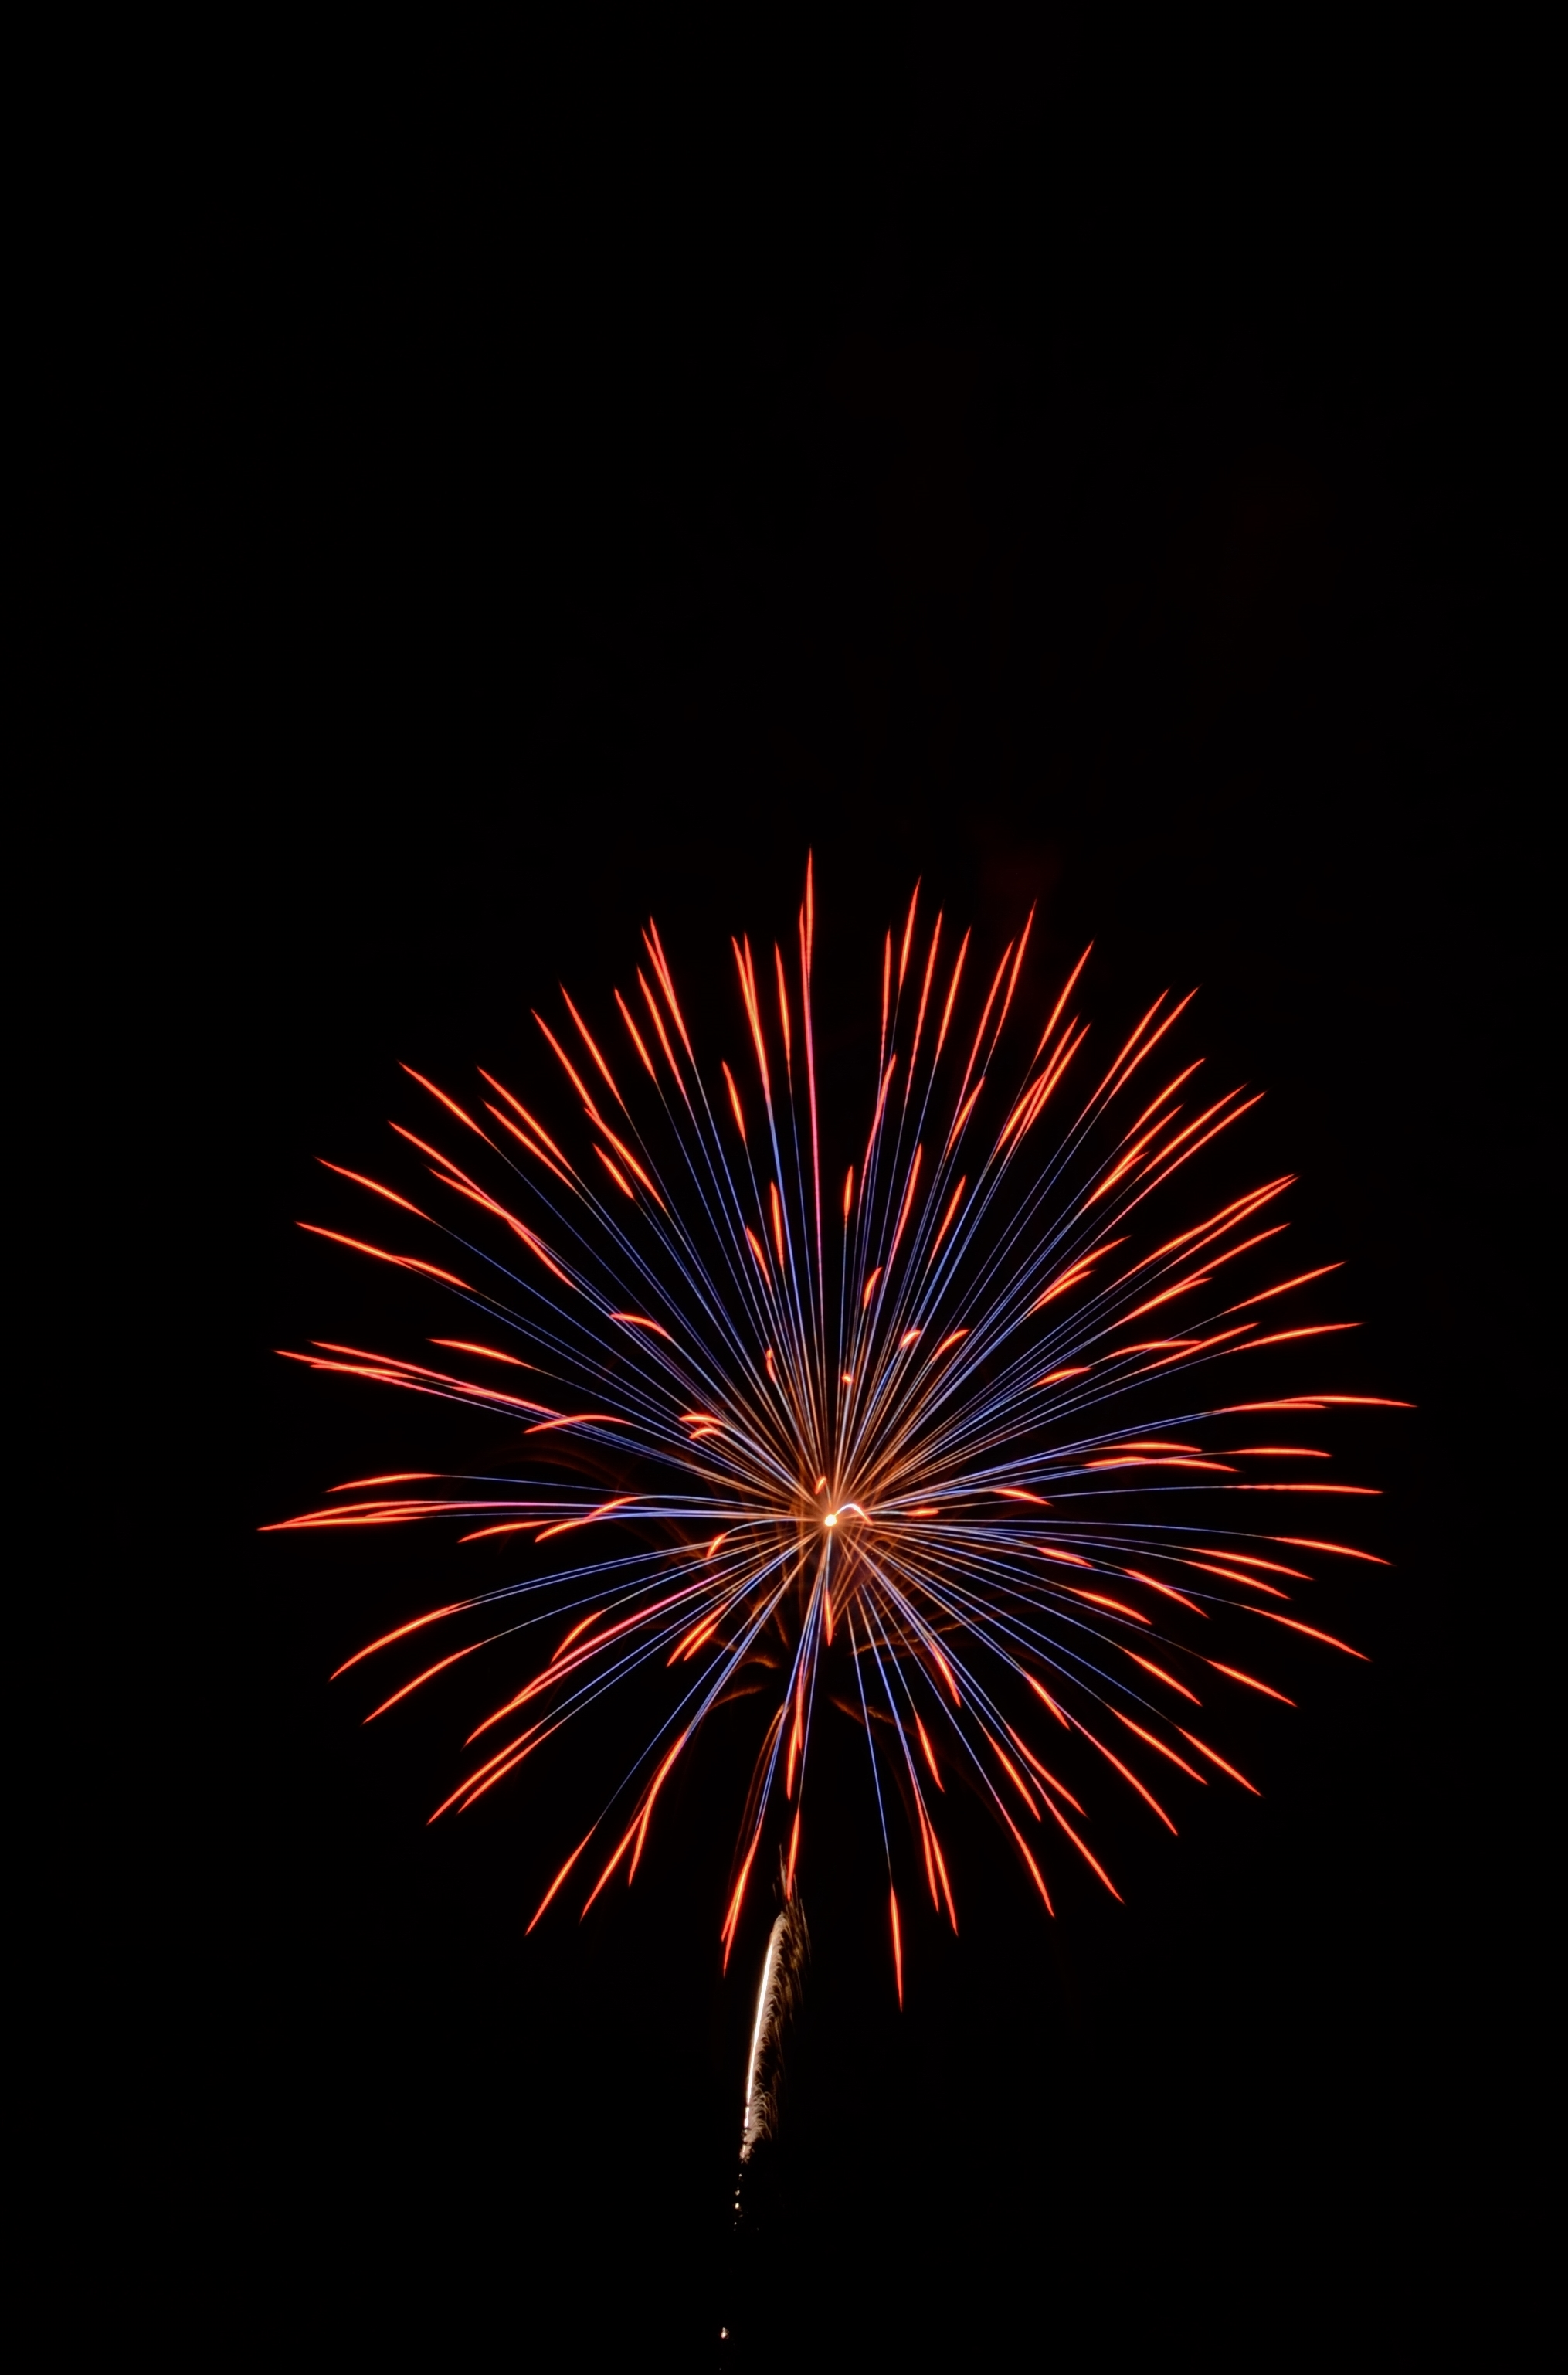 133922 free wallpaper 1080x2340 for phone, download images black, holidays, sparks, salute 1080x2340 for mobile